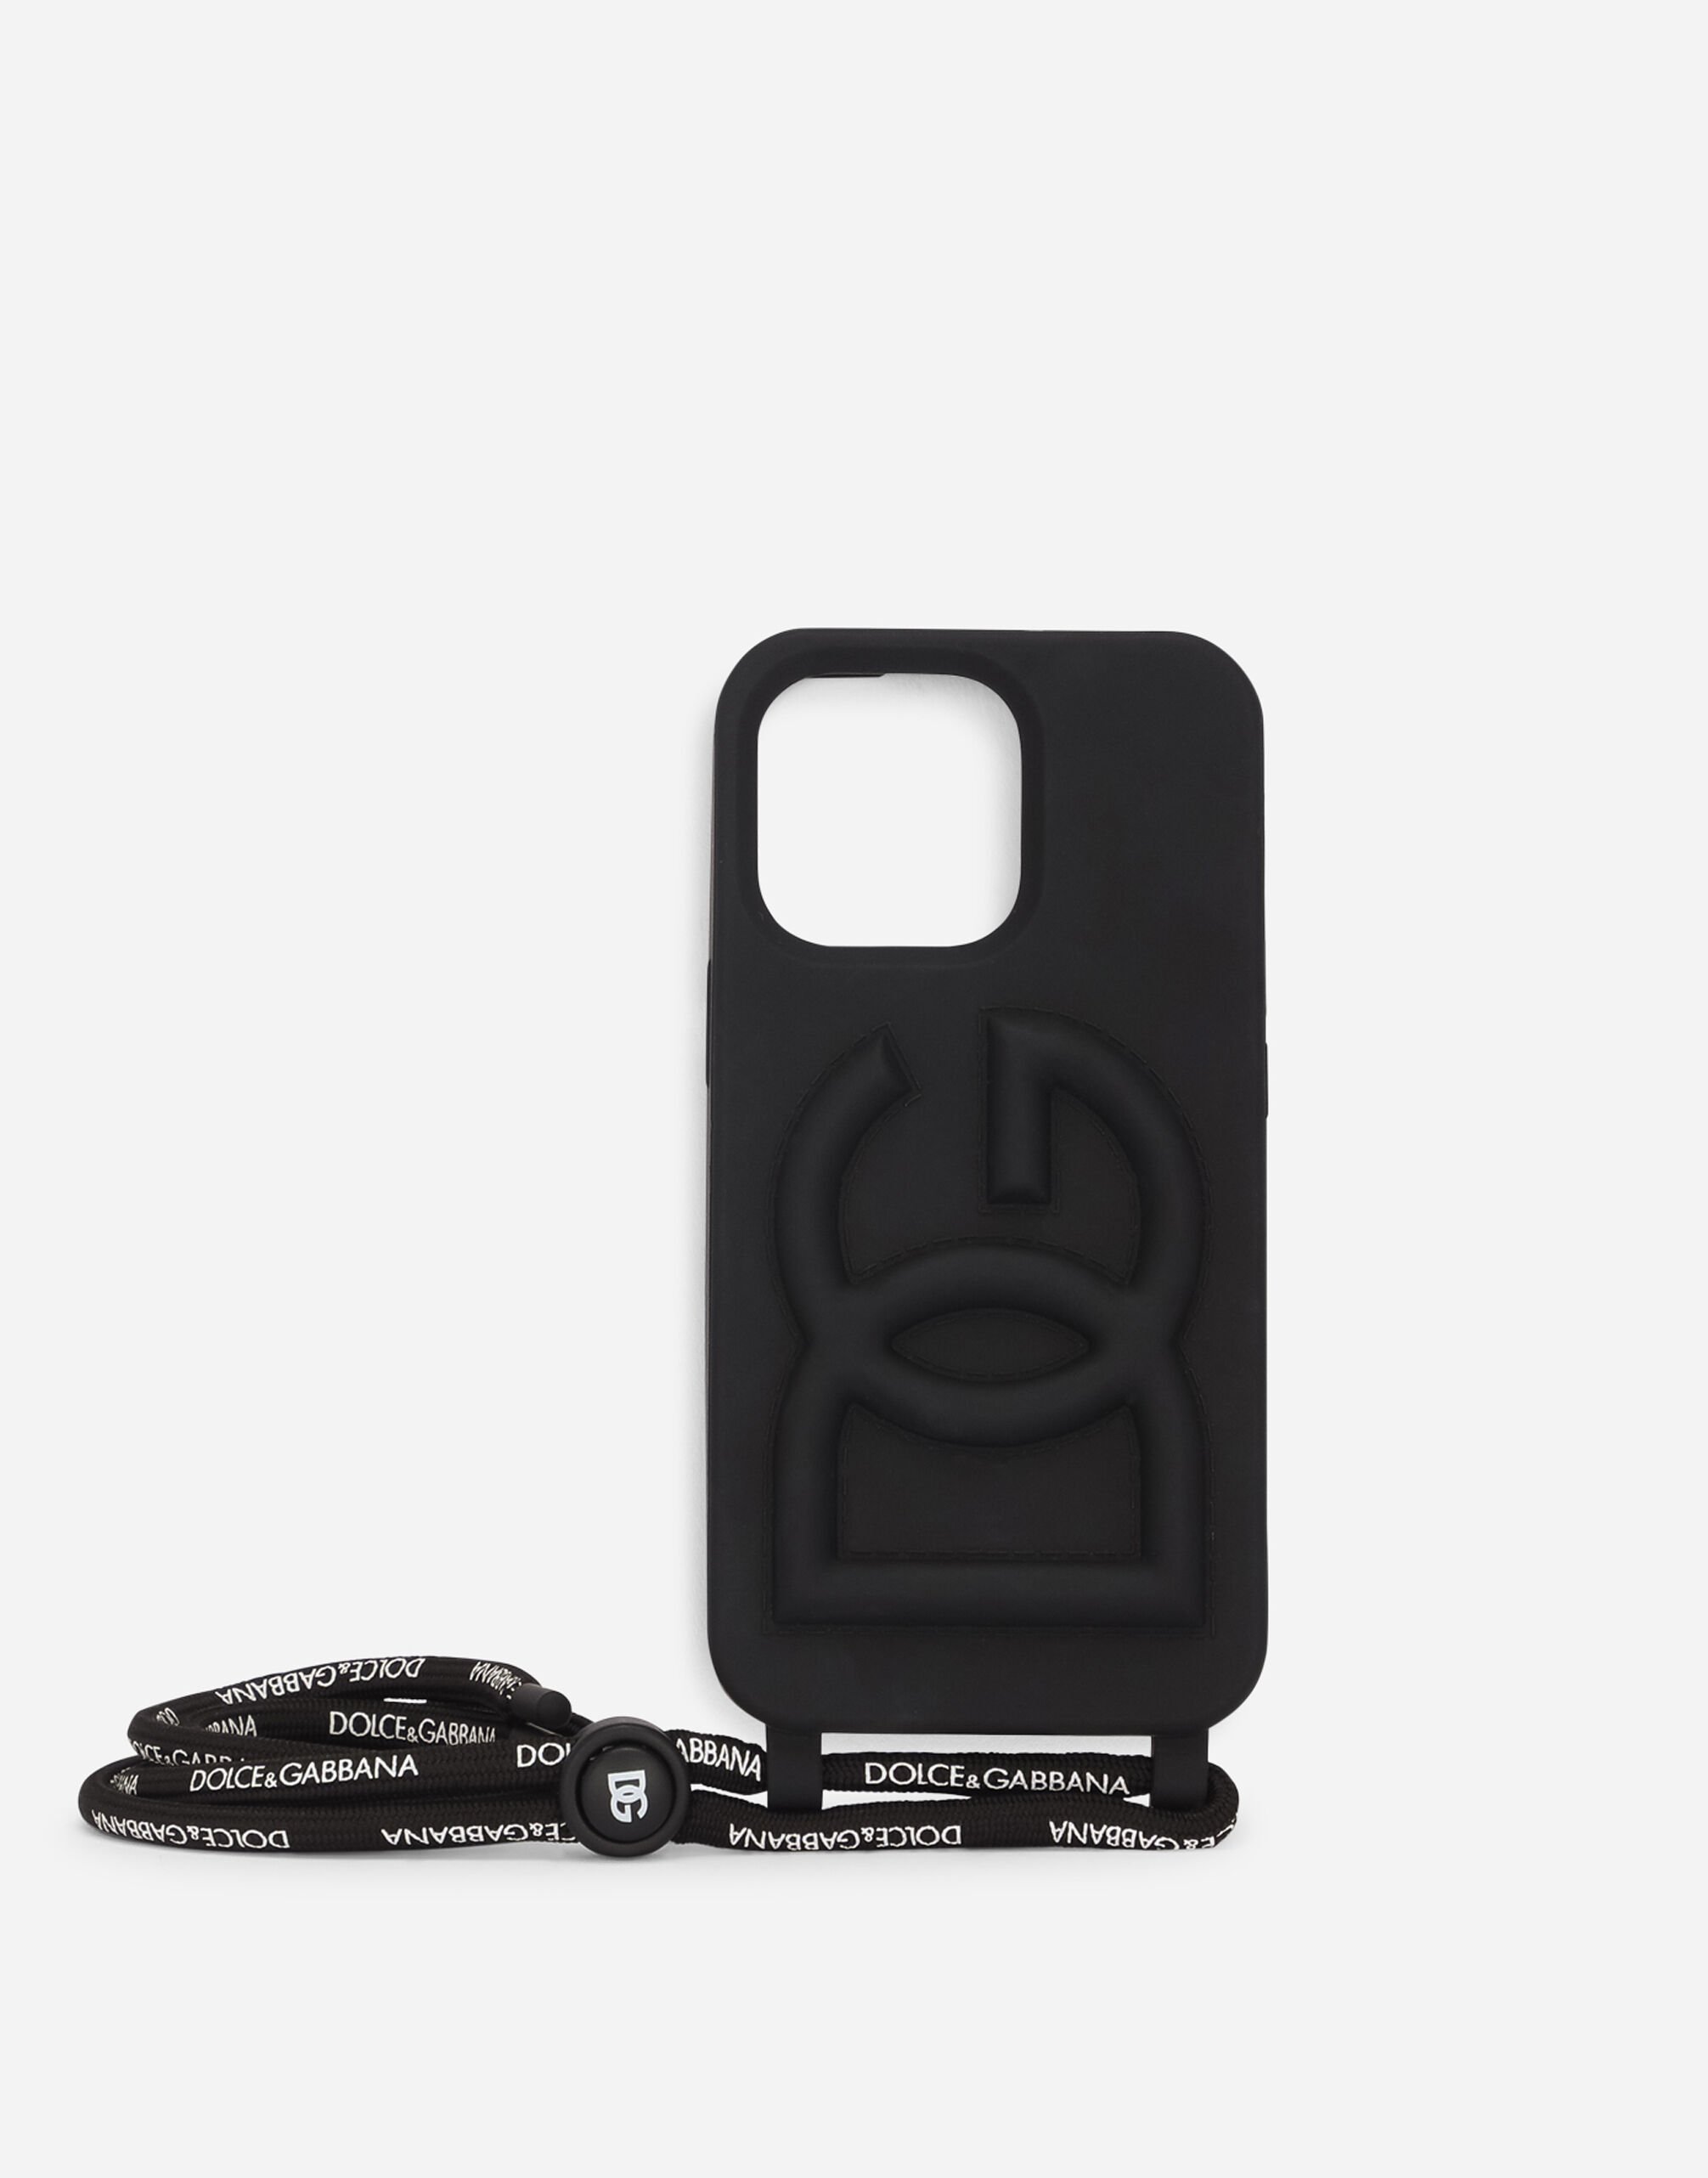 Designer covers for iPhone, AirPods, AirTag | Dolce&Gabbana®